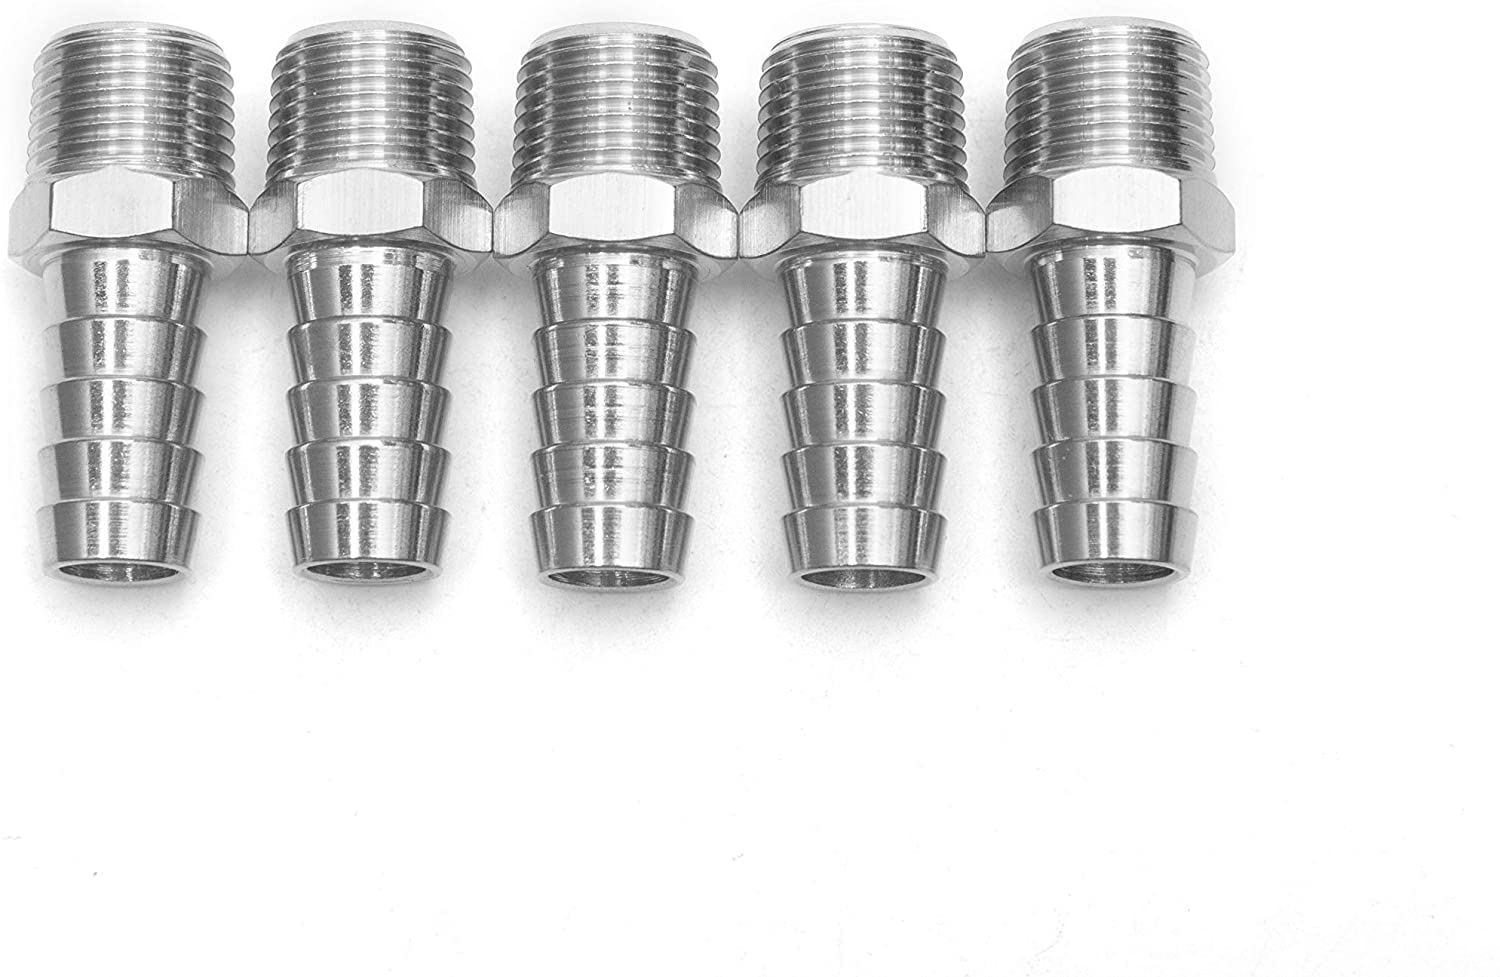 LTWFITTING Bar Production Stainless Steel 316 Barb Fitting Coupler/Connector 1/2 Inch Hose ID x 3/8 Inch Male NPT Air Fuel Water (Pack of 5)